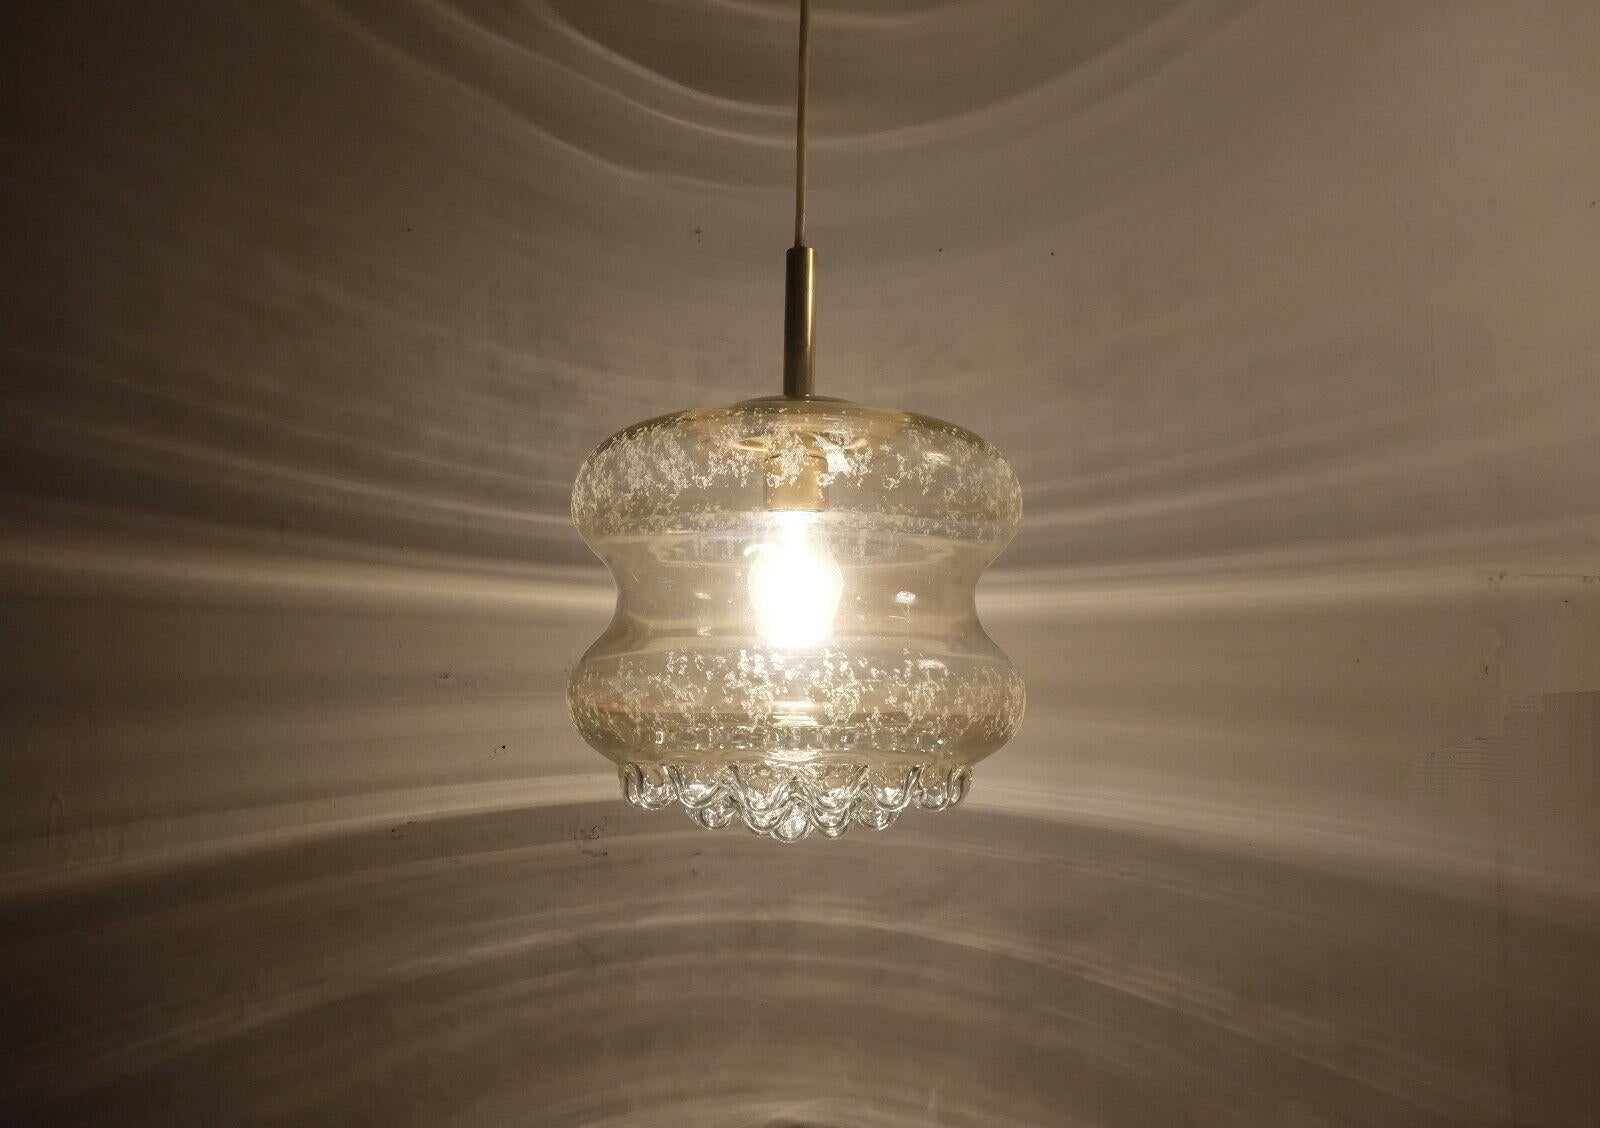 Beautiful 1960s 70s pendant light. The shade is made of slightly amber tinted glass with an etched pattern and a bubble surface at the bottom. Brass holder. White electric wire andwhite canopy. Holds one E27 bulb (bulb is not included in the offer).